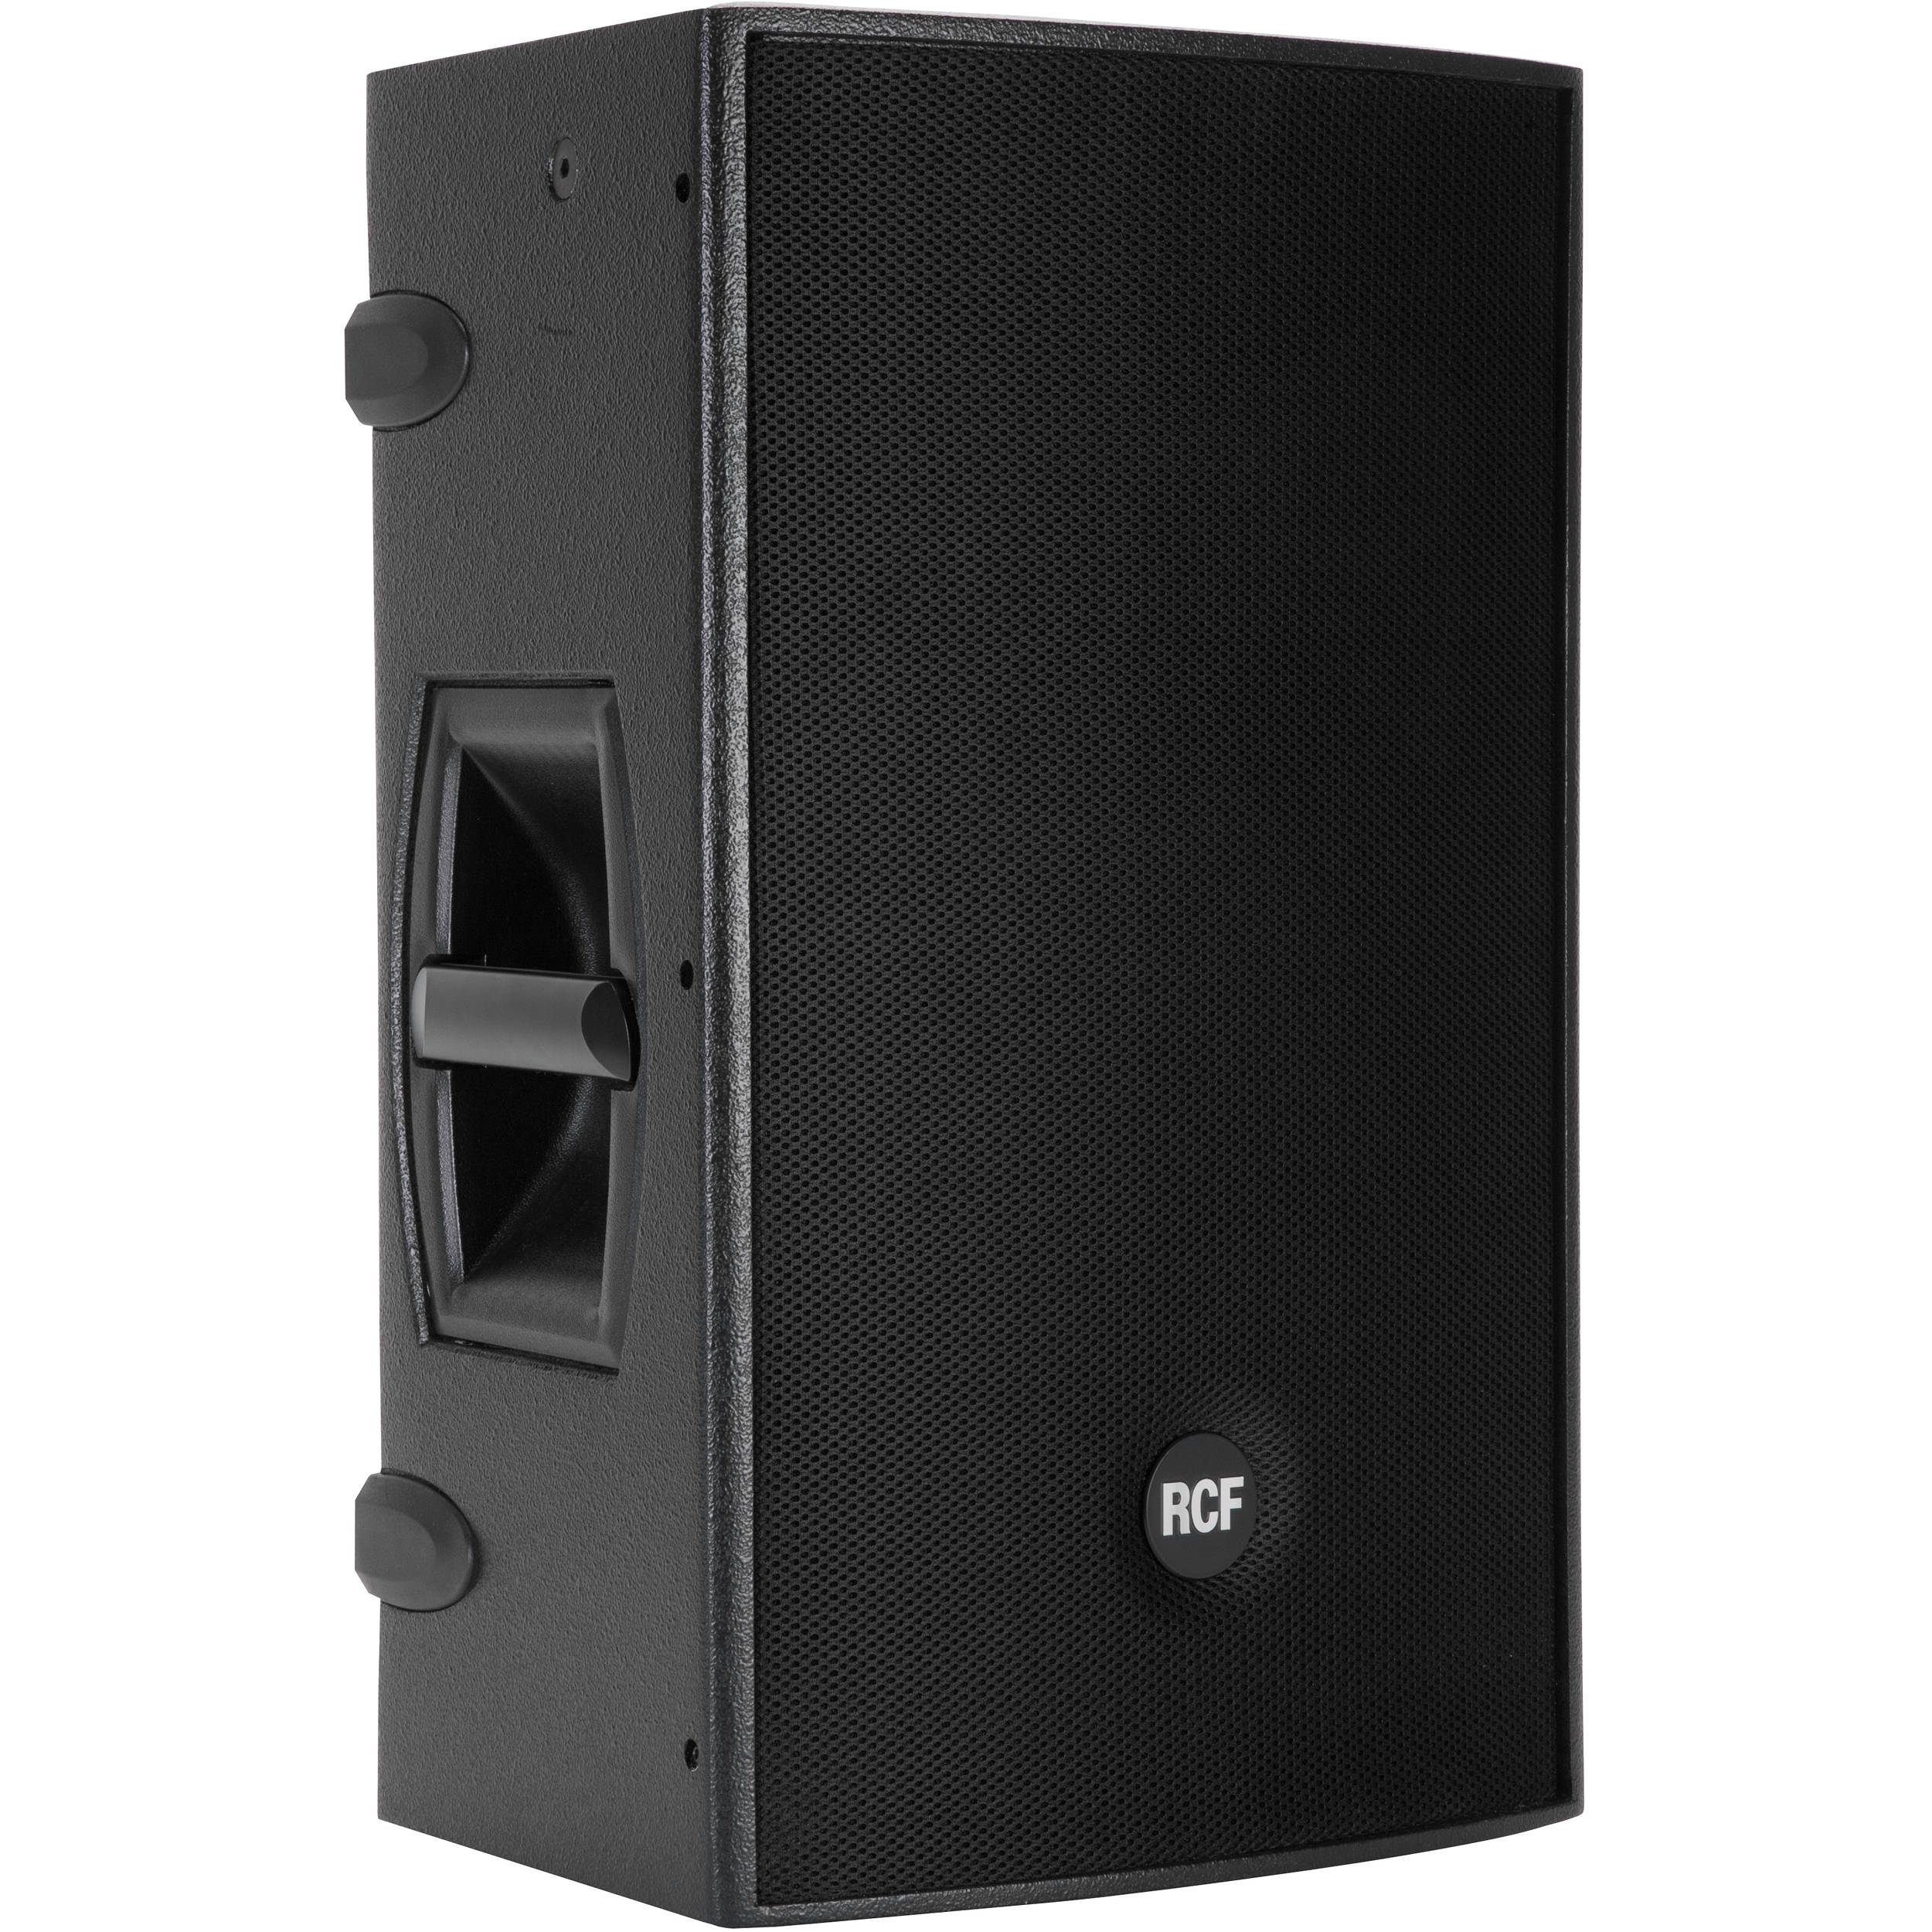 rcf professional speakers